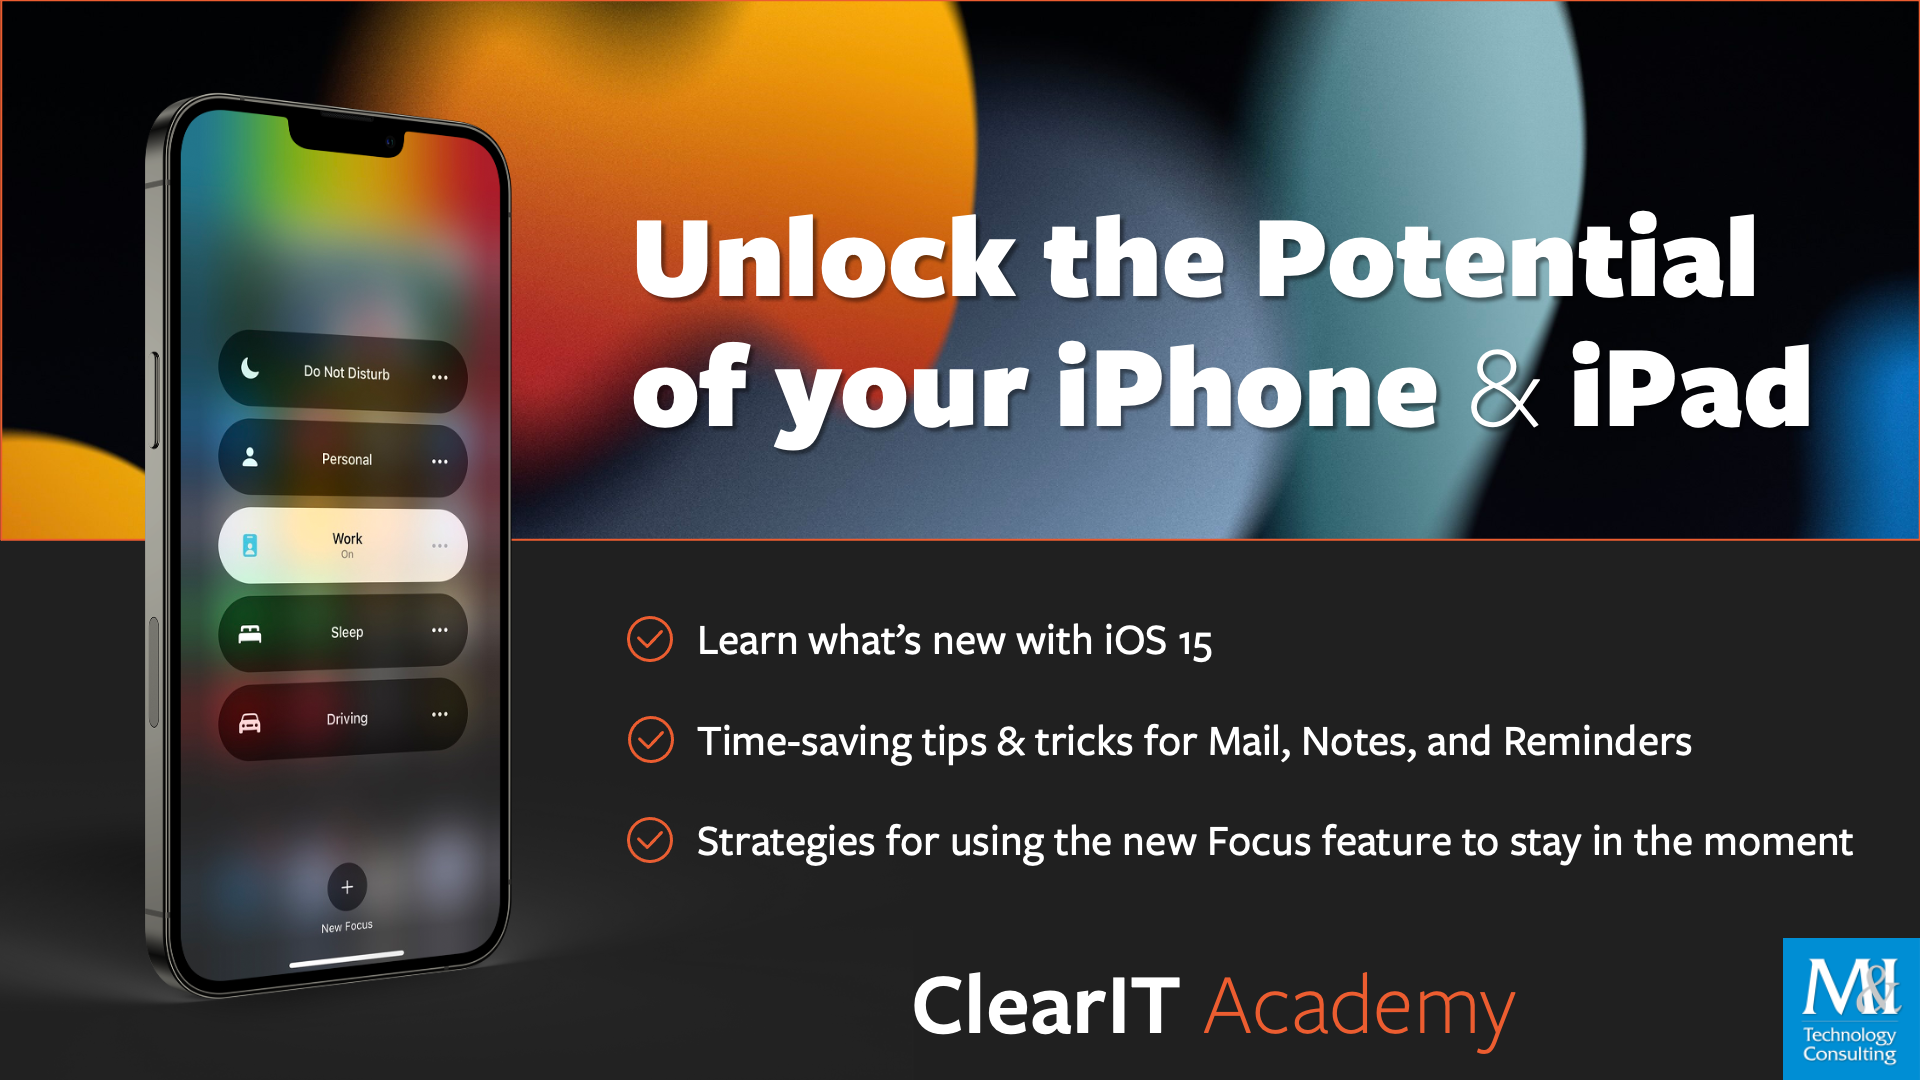 Unlock the Potential of your iPhone and iPad